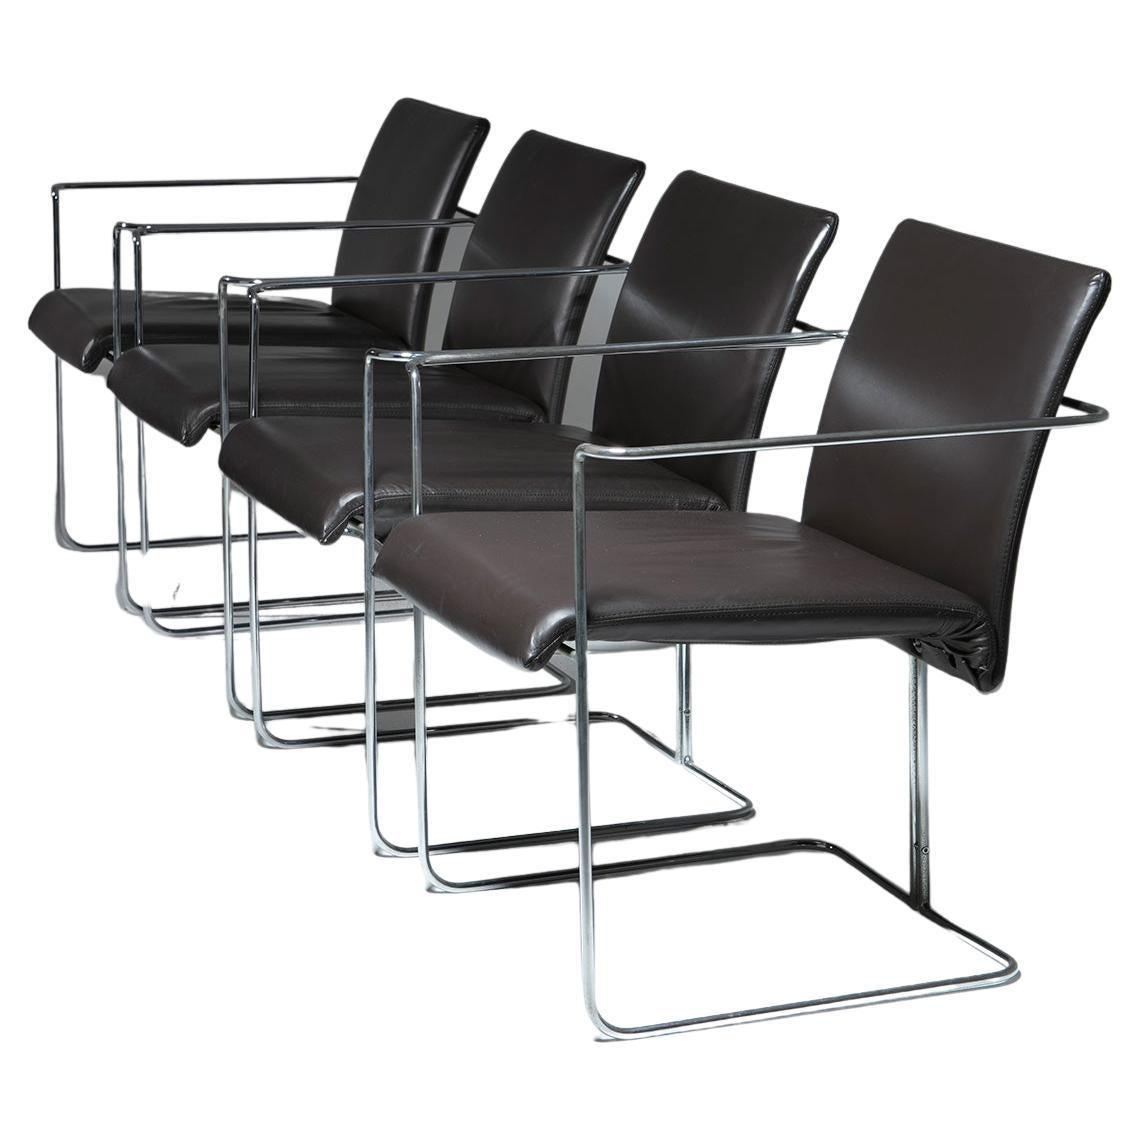 Set of four P15 arrmchairs by Ernesto Redaelli for Saporiti.
Steel frame supporting leather covered seating.